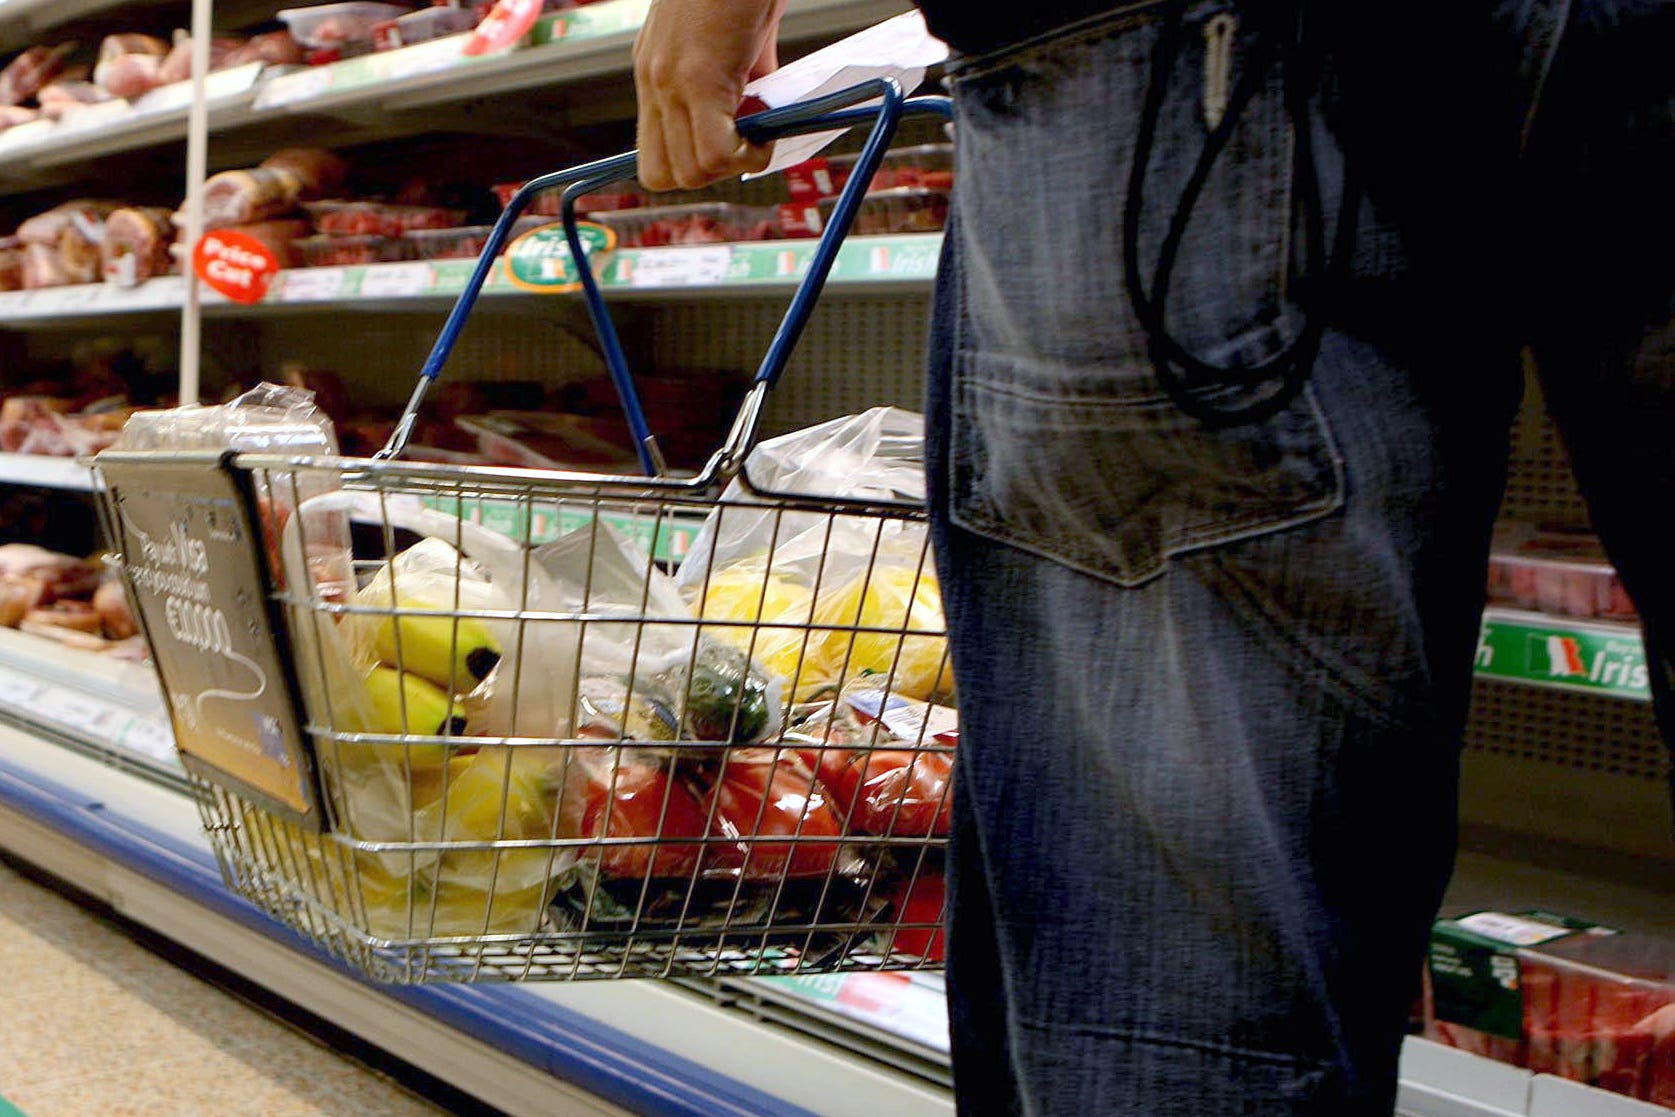 Undated file photo of a person holding a shopping basket in a supermarket.